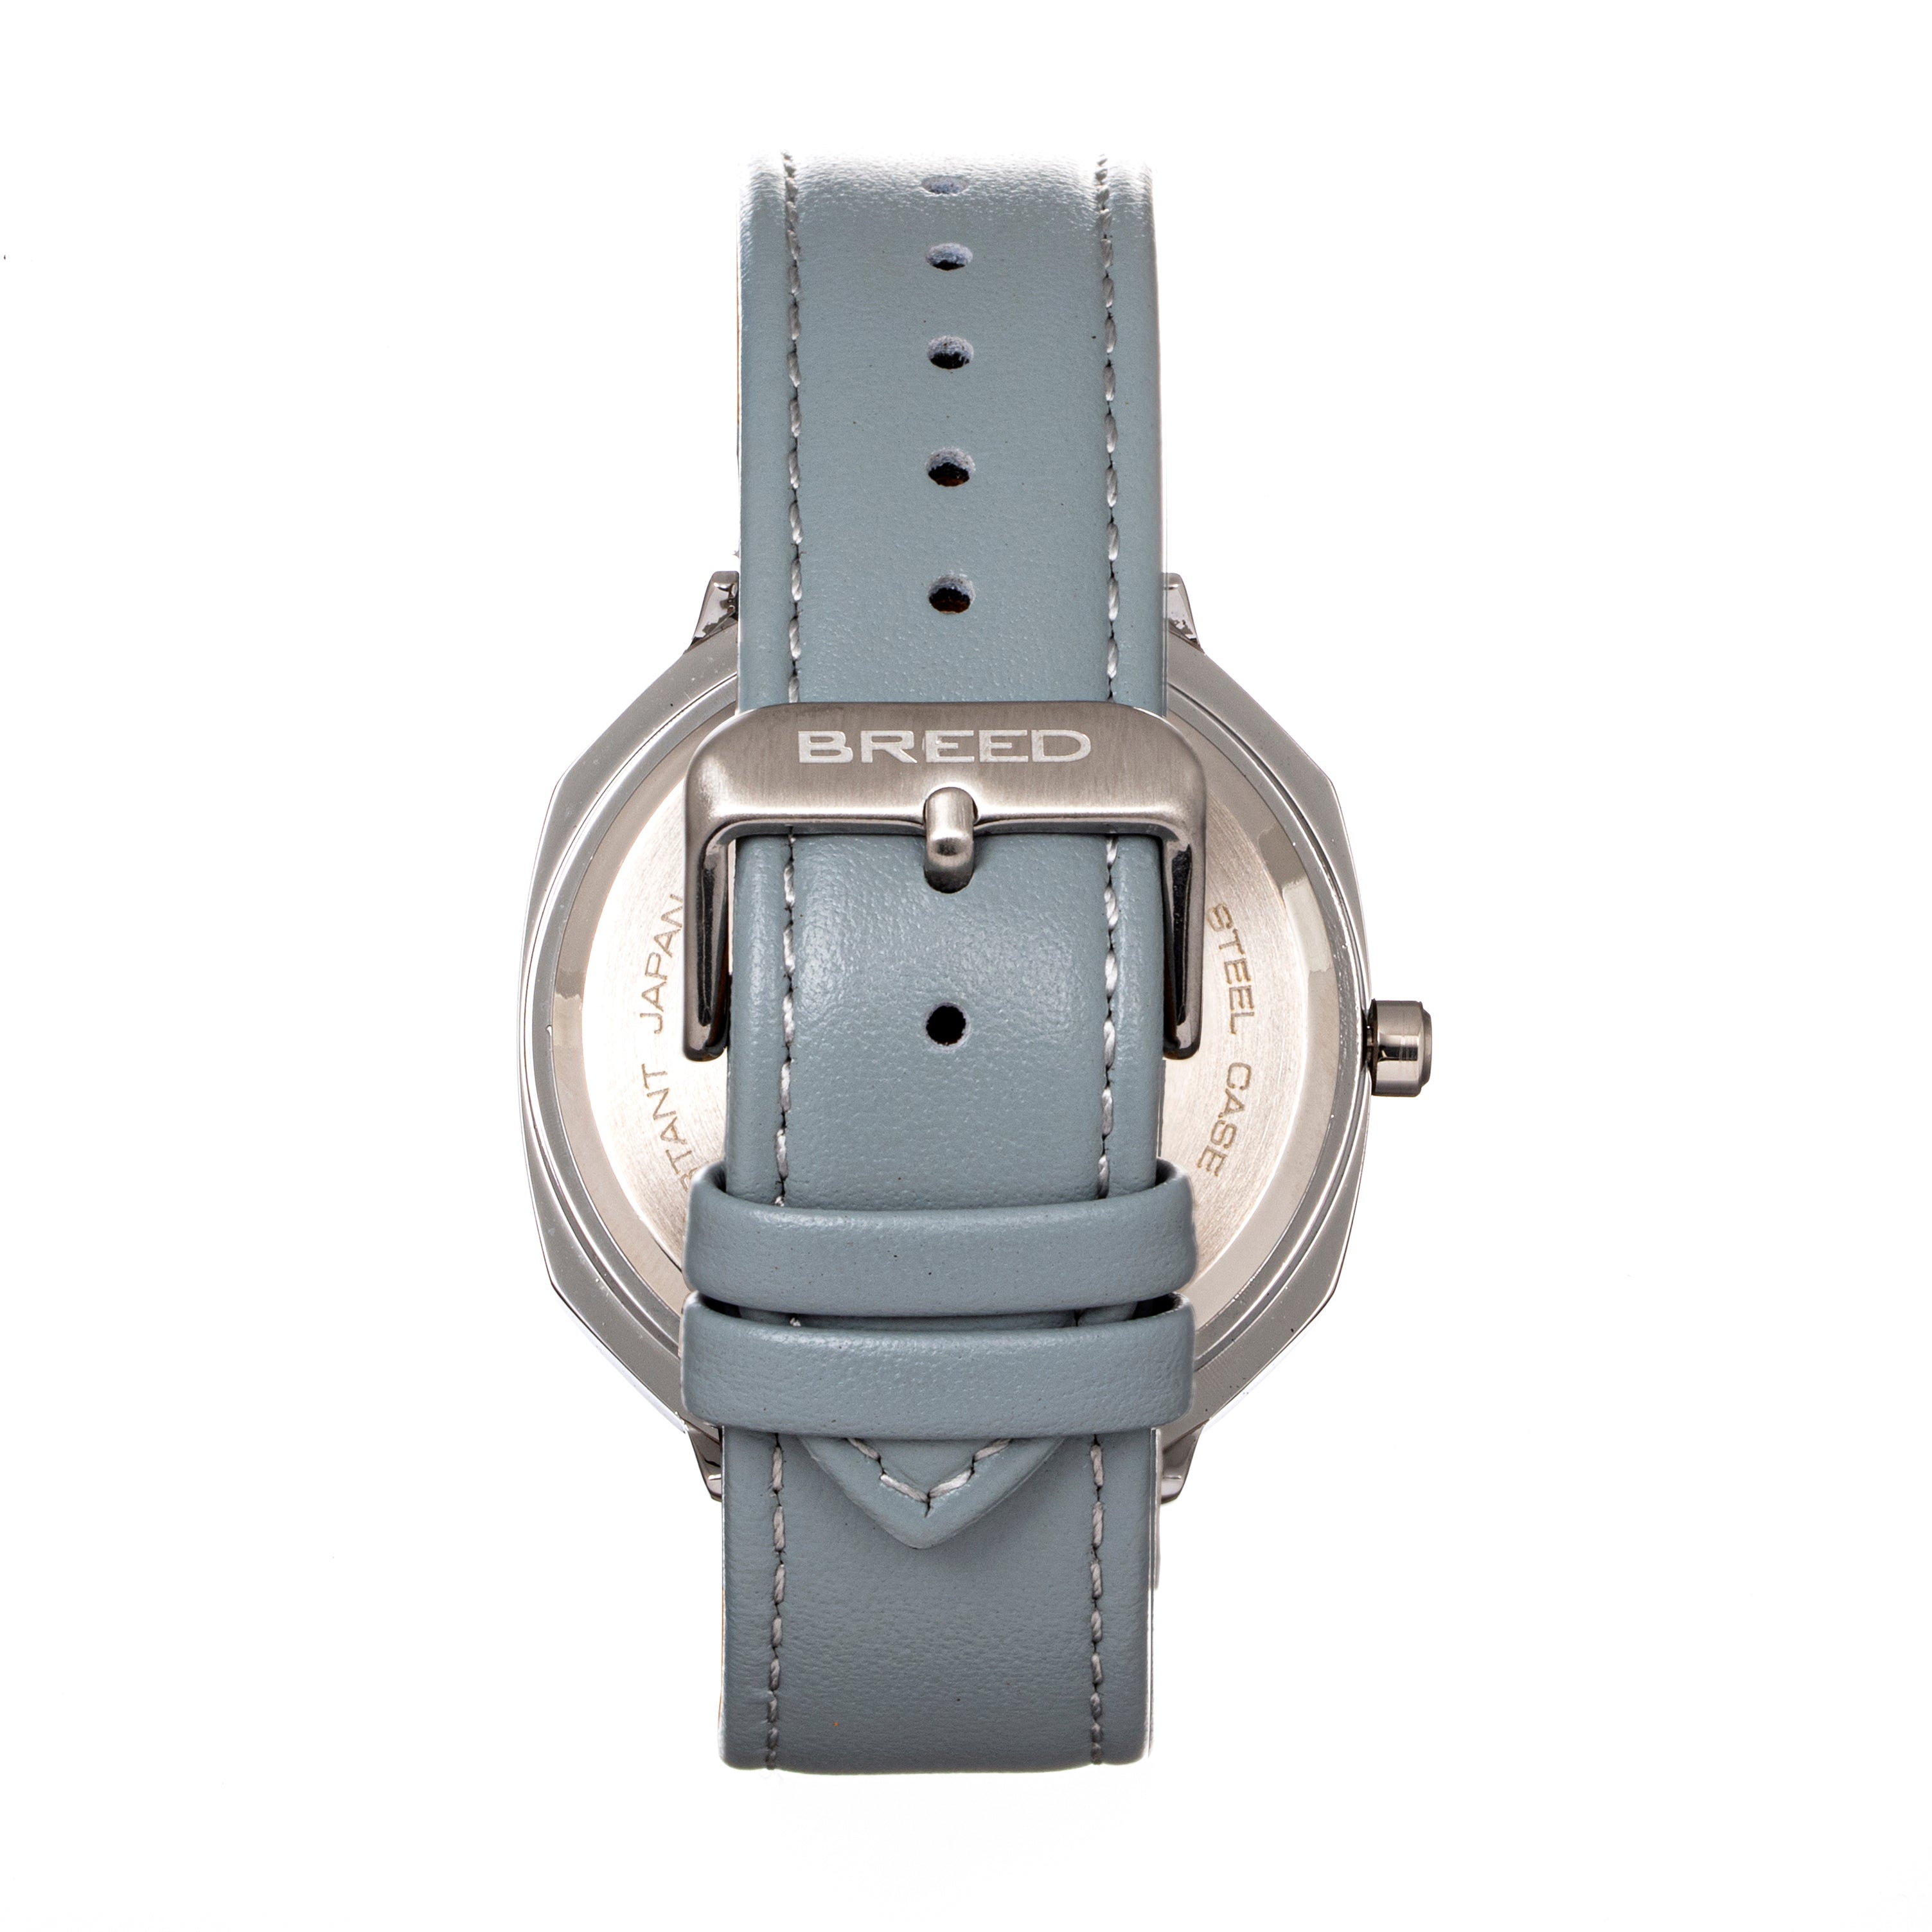 Breed Revolver Leather-Band Watch w/Day/Date - Grey/Navy - BRD9302